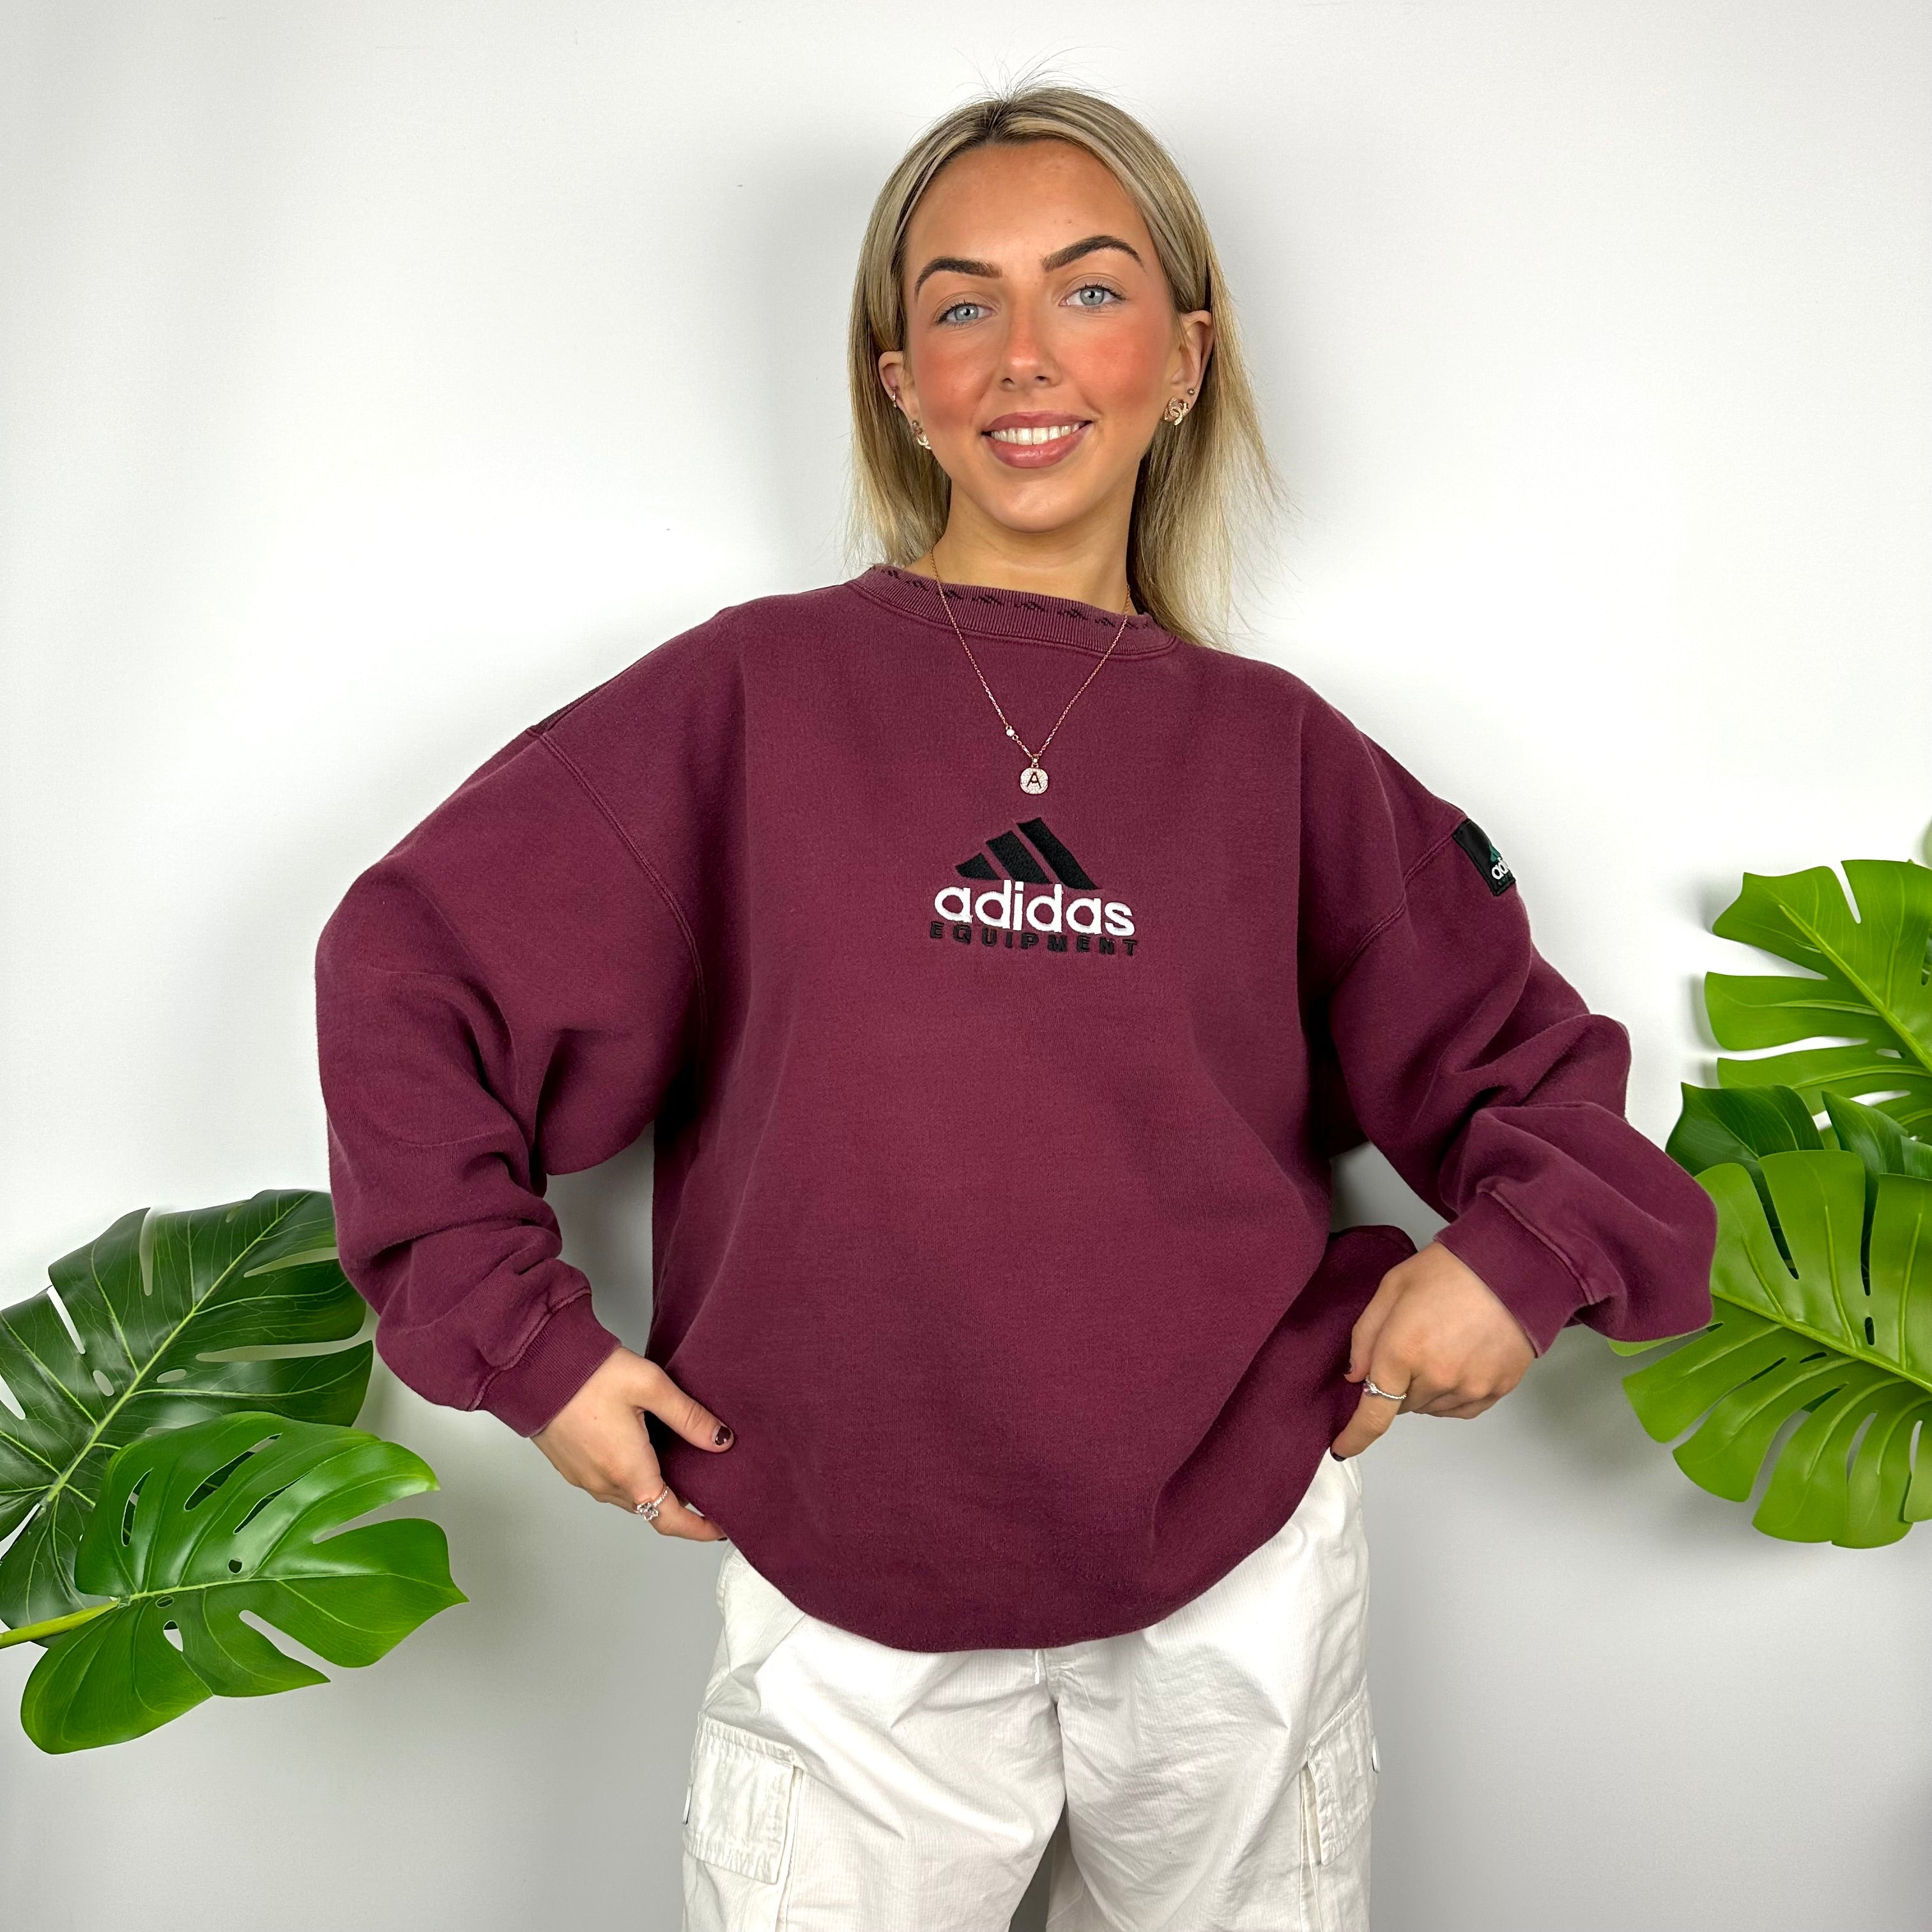 Adidas Equipment Maroon Embroidered Spell Out Sweatshirt (L)